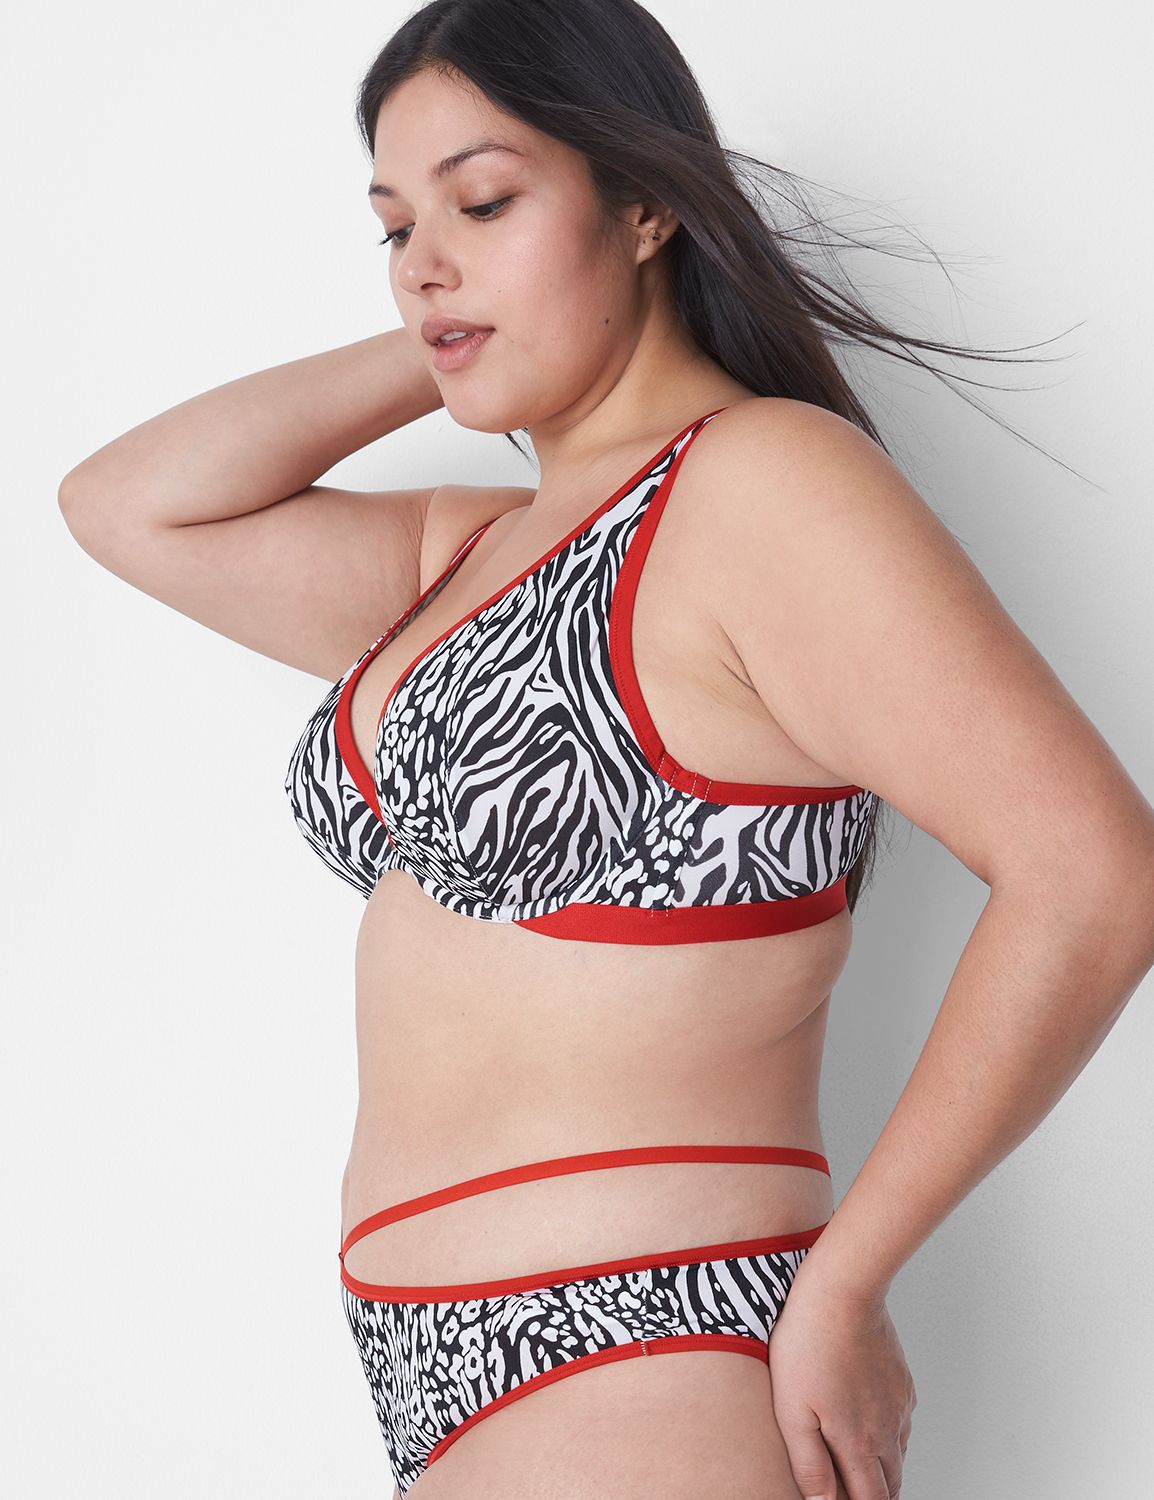 Lane Bryant Cacique Marble Mesh Unlined High Apex Underwire Bralette Size  40D - $36 New With Tags - From Amber